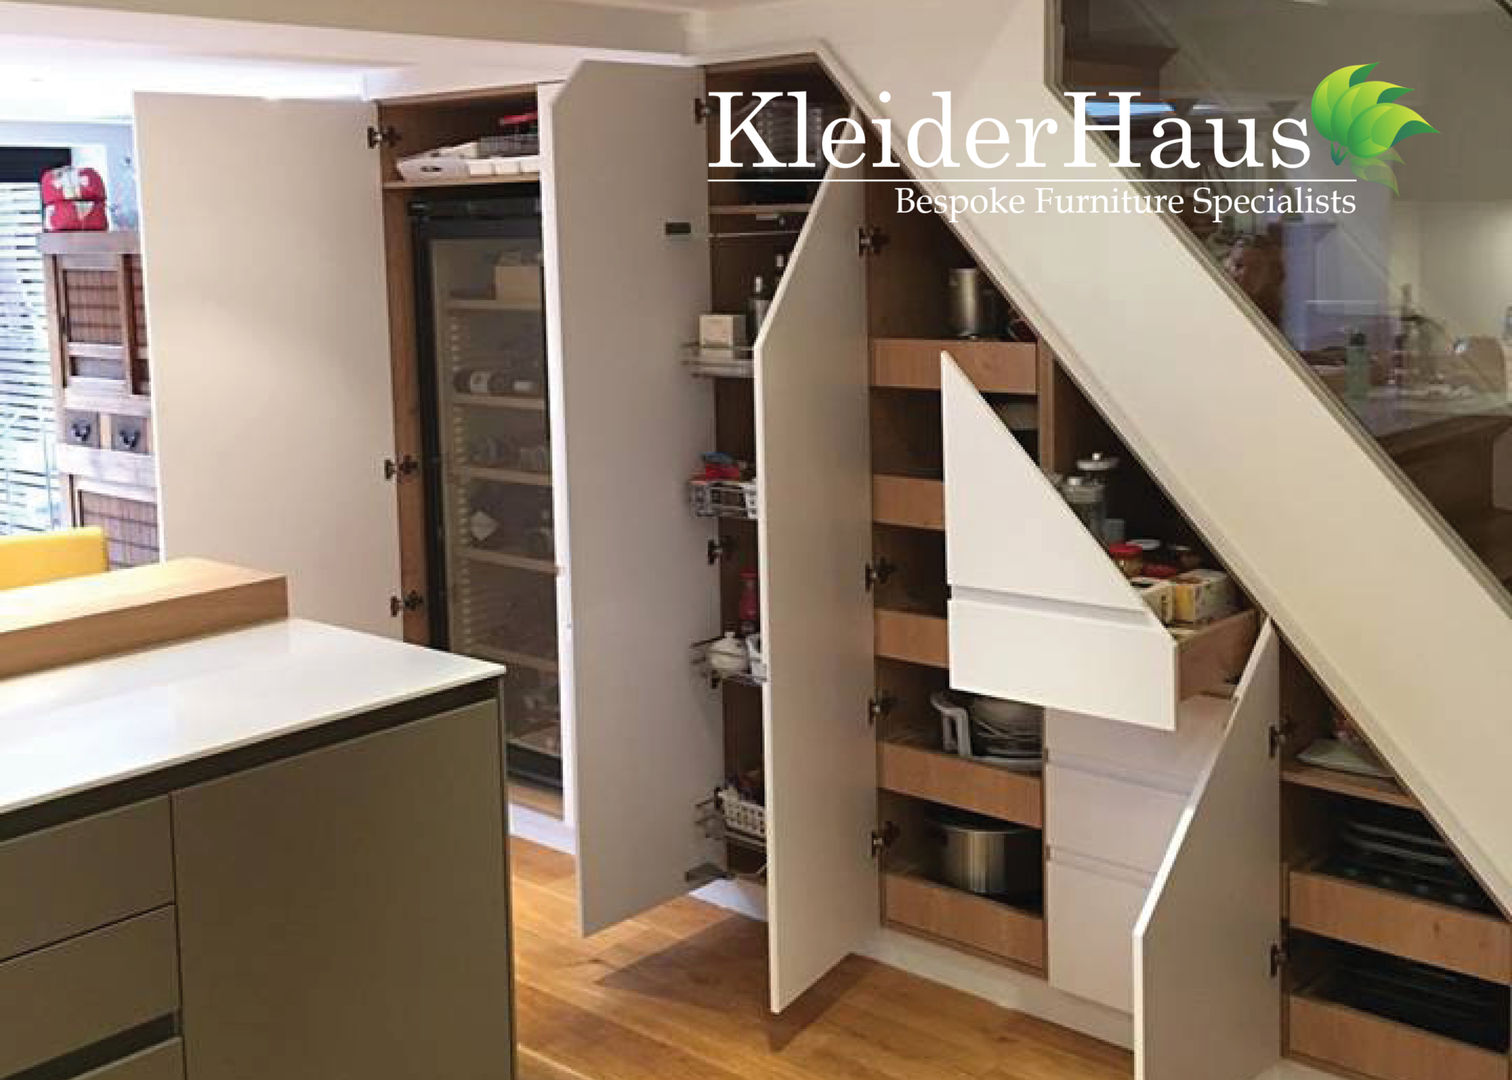 Kitchen Understairs unit - Finally project Completed by Kleiderhaus Kleiderhaus ltd Kitchen understairs,kitchen understairs,kitchen,fitted kitchen,utility,made to measure,awkward space,bespoke kitchen,joinery,kitchen remodeling,custom made,under-stairs